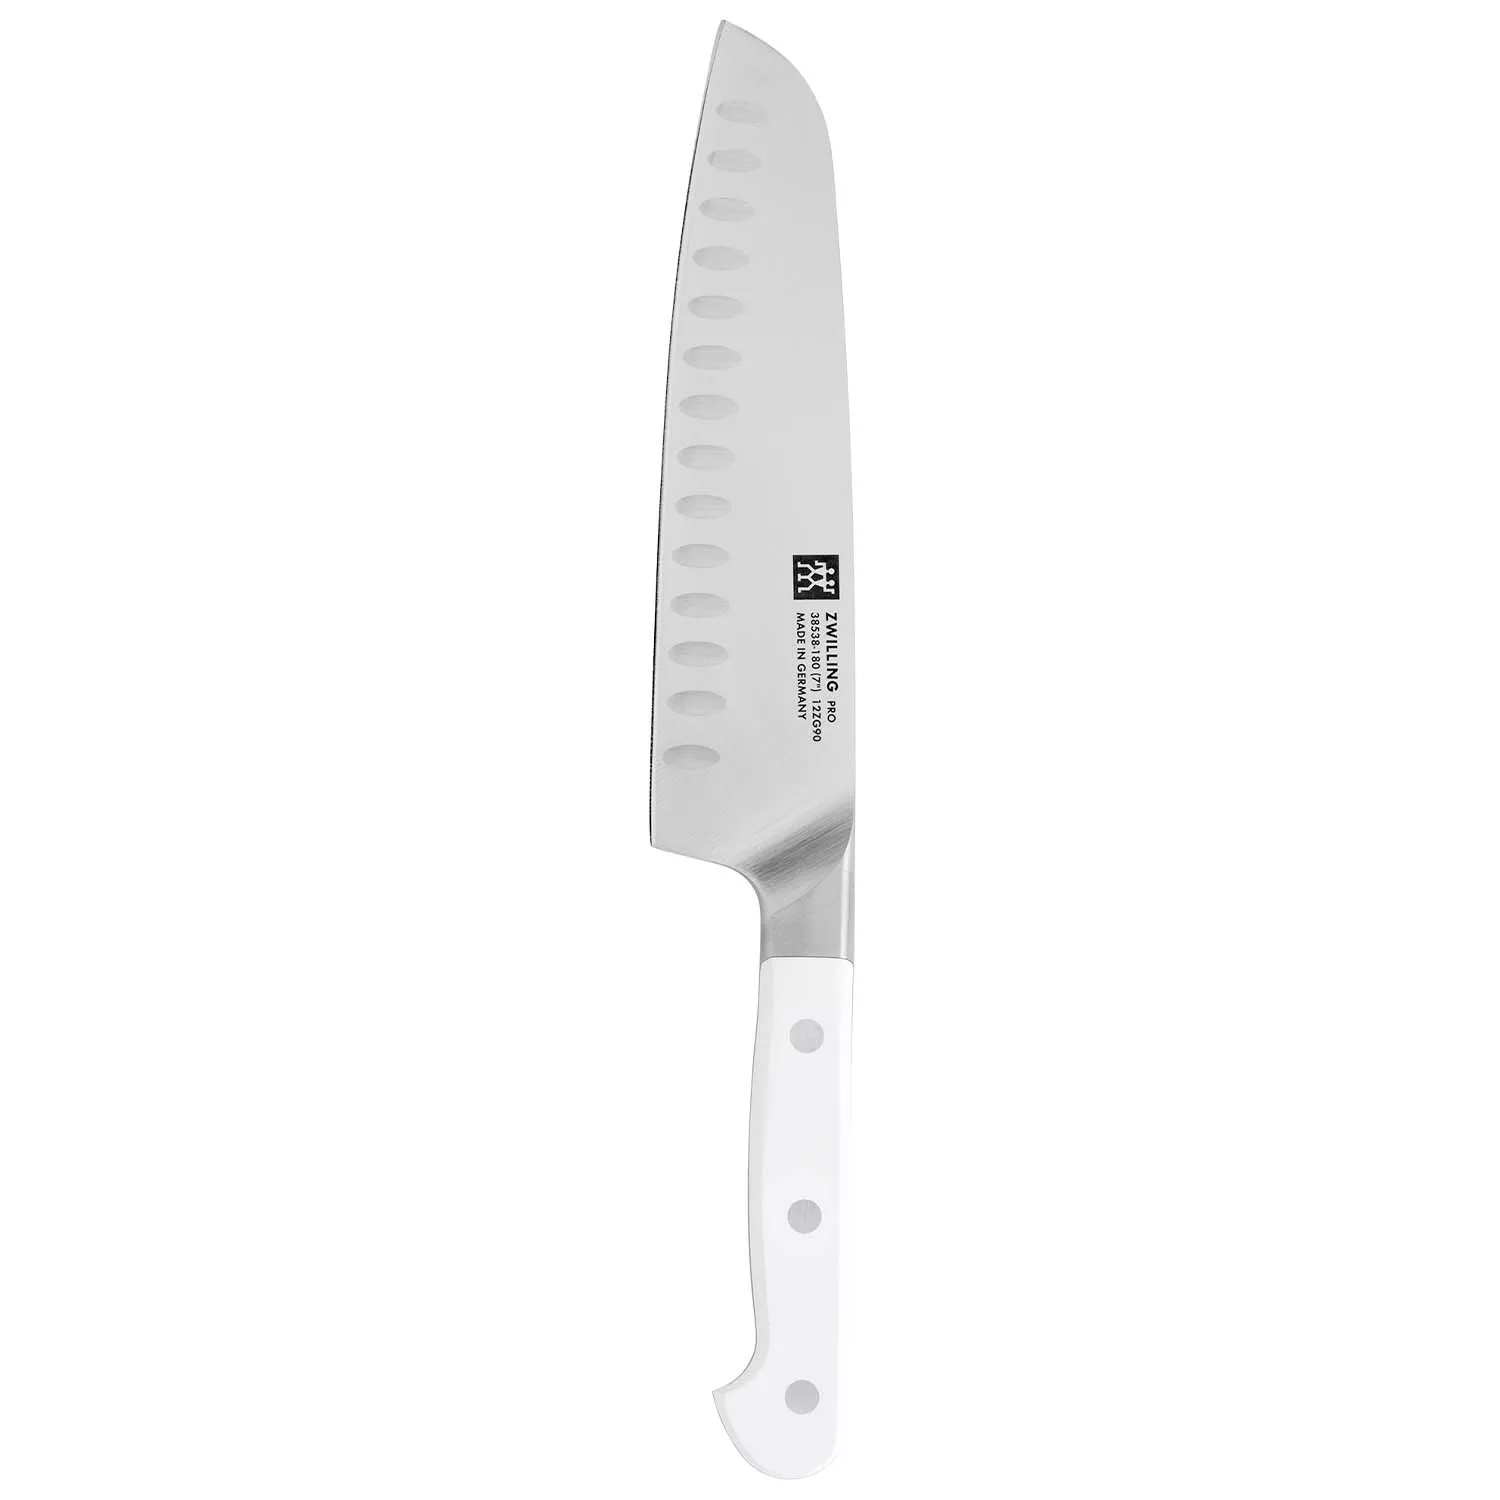 ZWILLING J.A. Henckels Gourmet 5-Piece White Canister Knife Set + Reviews